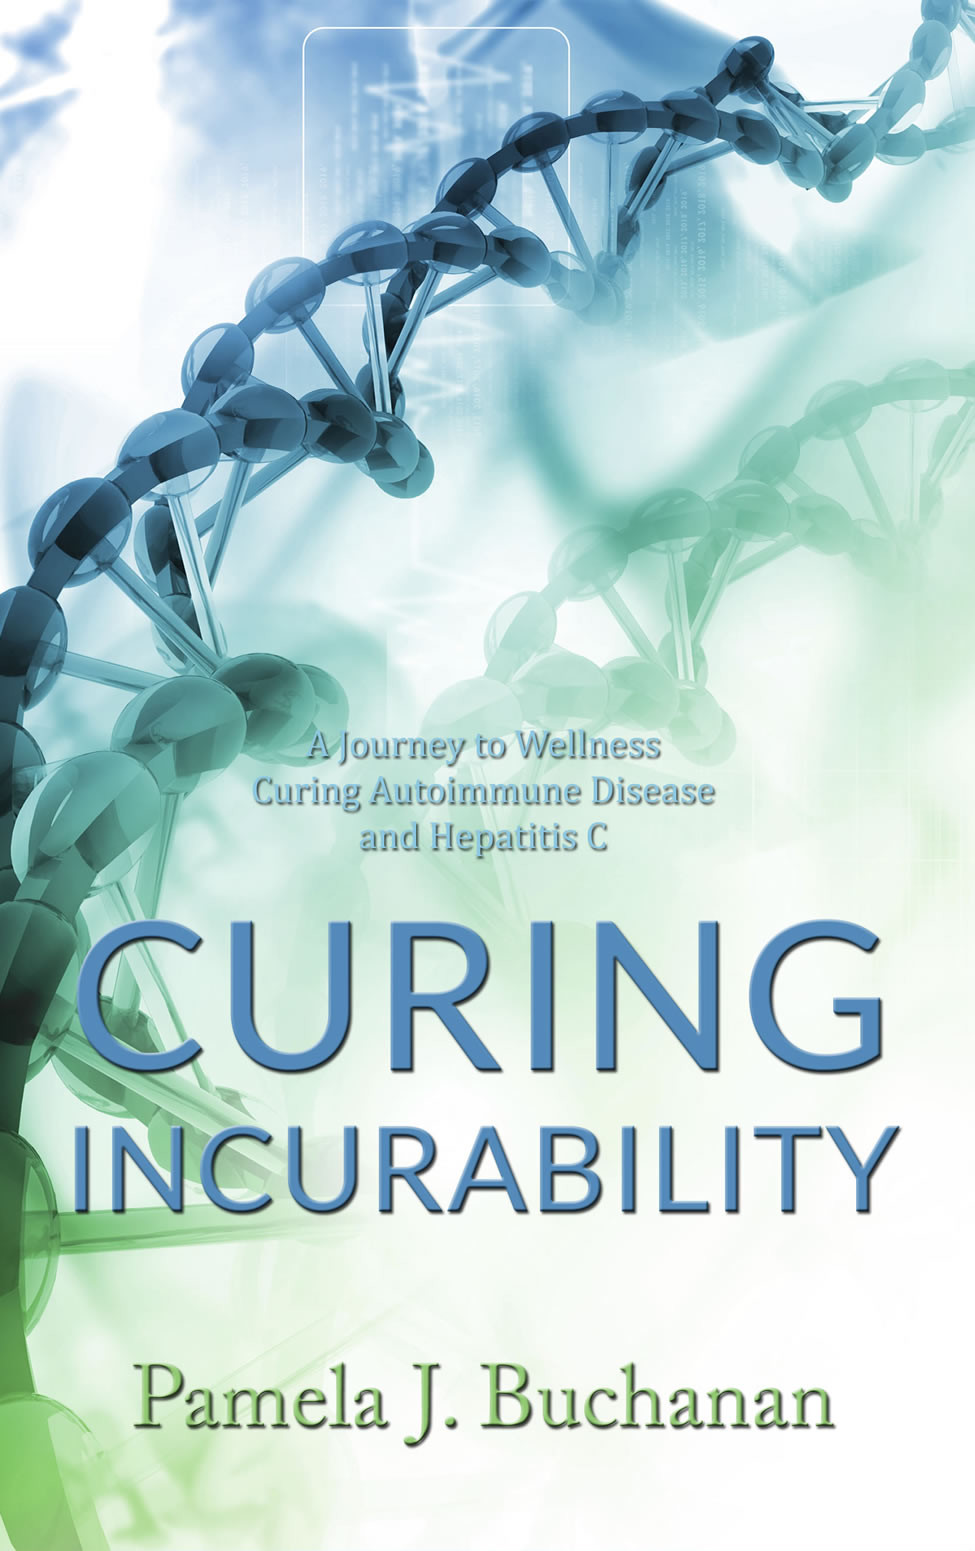 Cover Curing Incurability